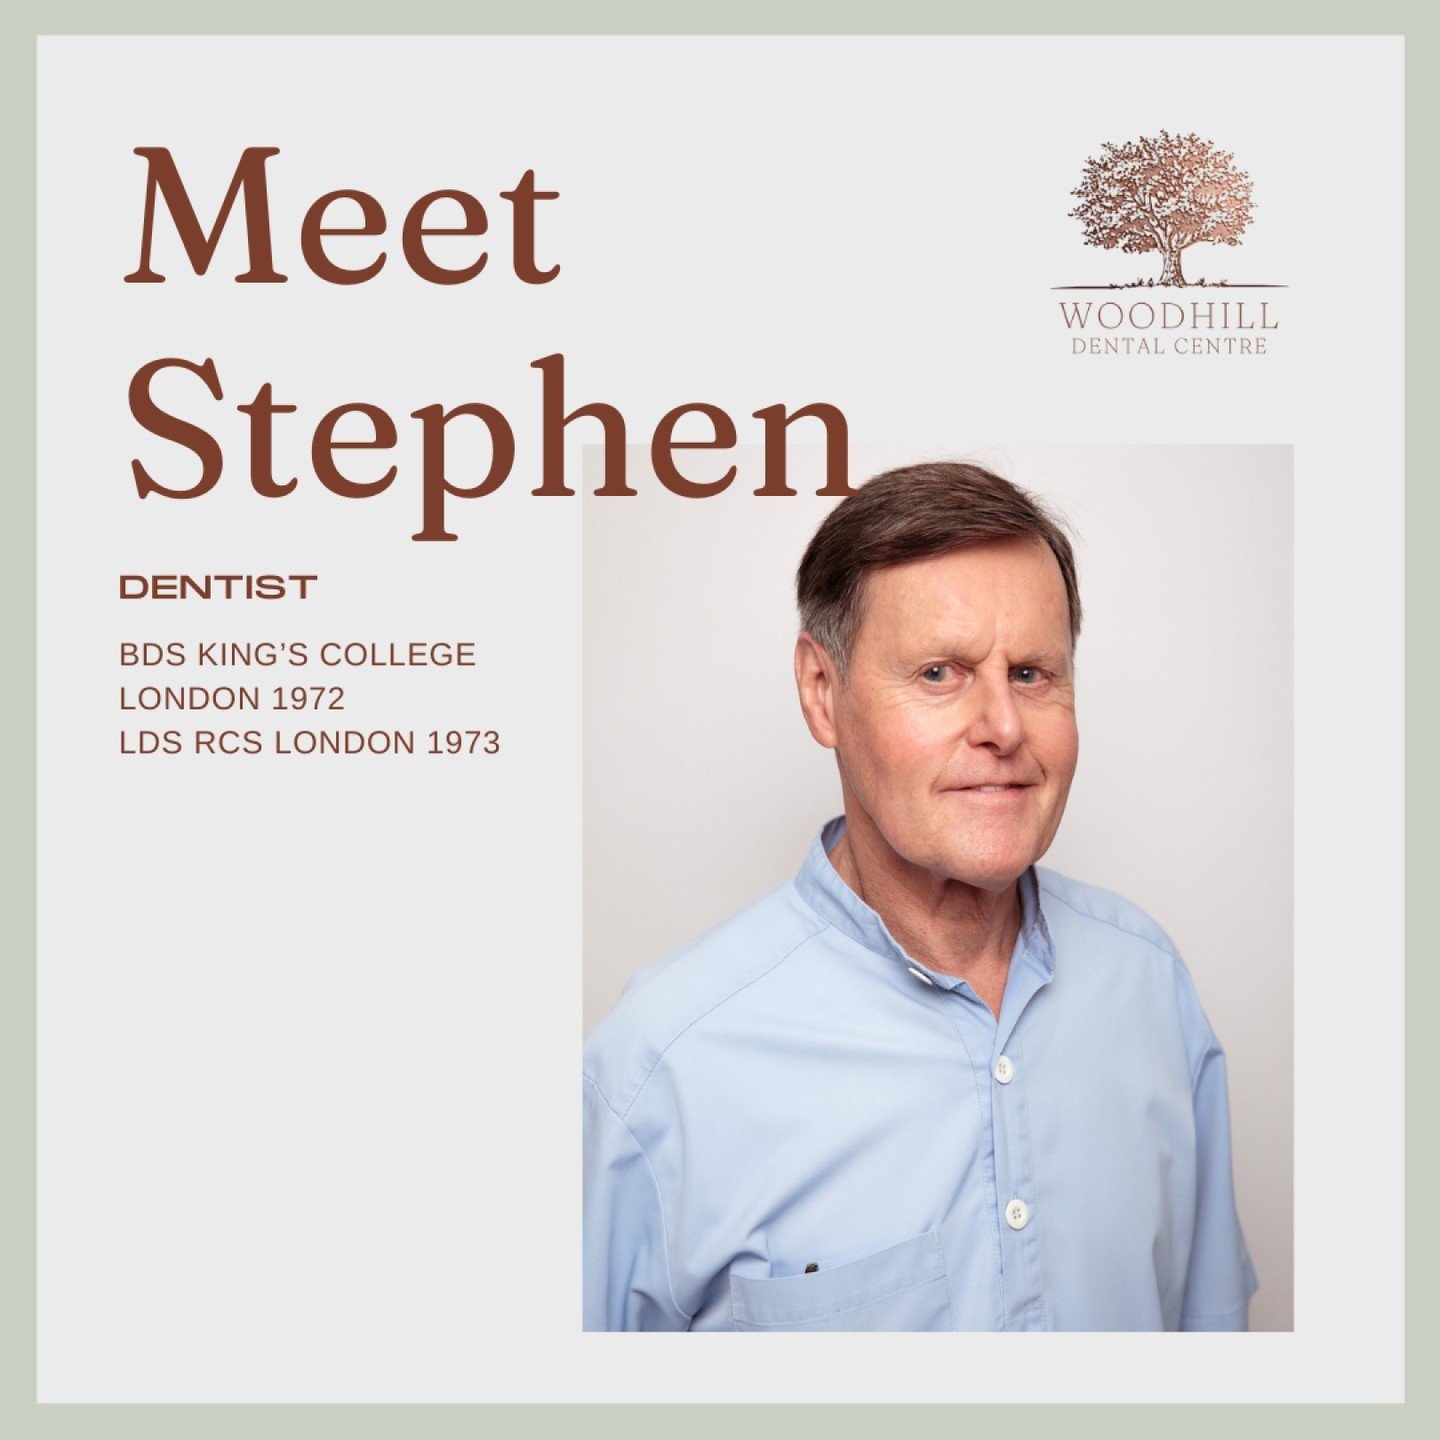 Meet The Team Monday: Introducing Stephen

Stephen is a highly experienced and dedicated member of our dental team. With over 50 years of experience in General Dental Practice, Stephen brings a wealth of knowledge and expertise to our practice.
Steph